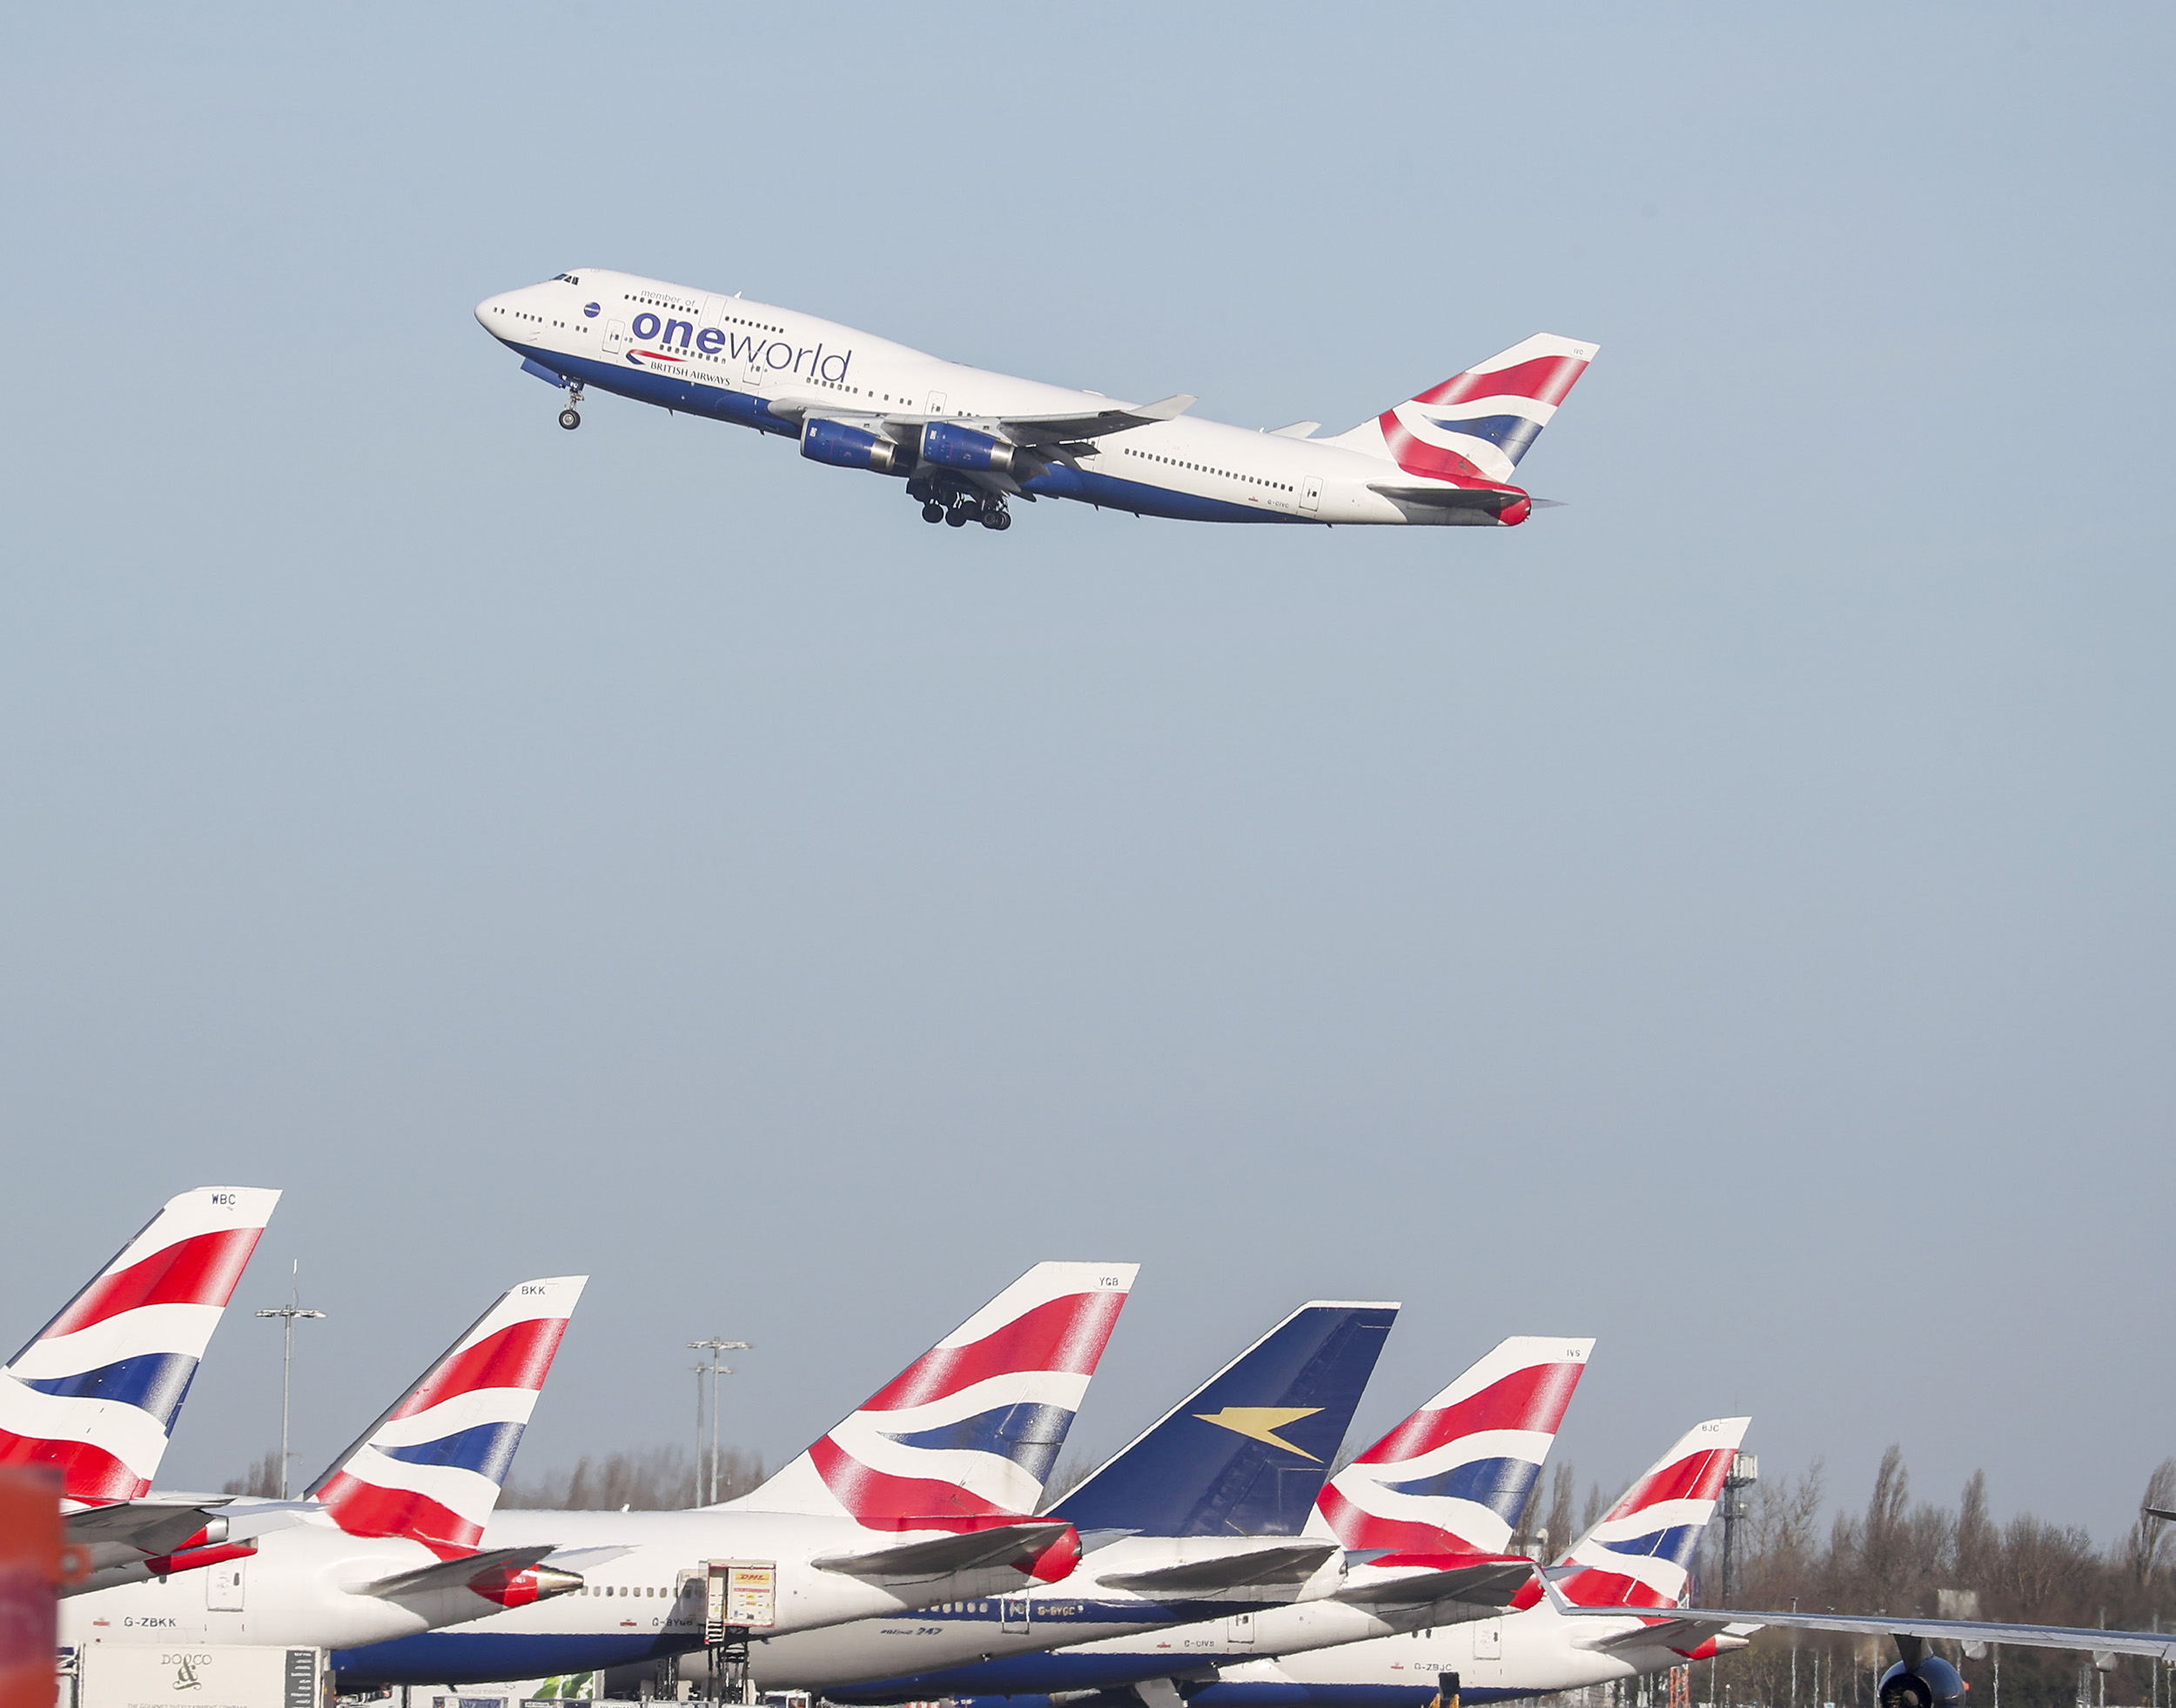 A British Airways plane takes off at Heathrow Airport on January 29, in London, England. 